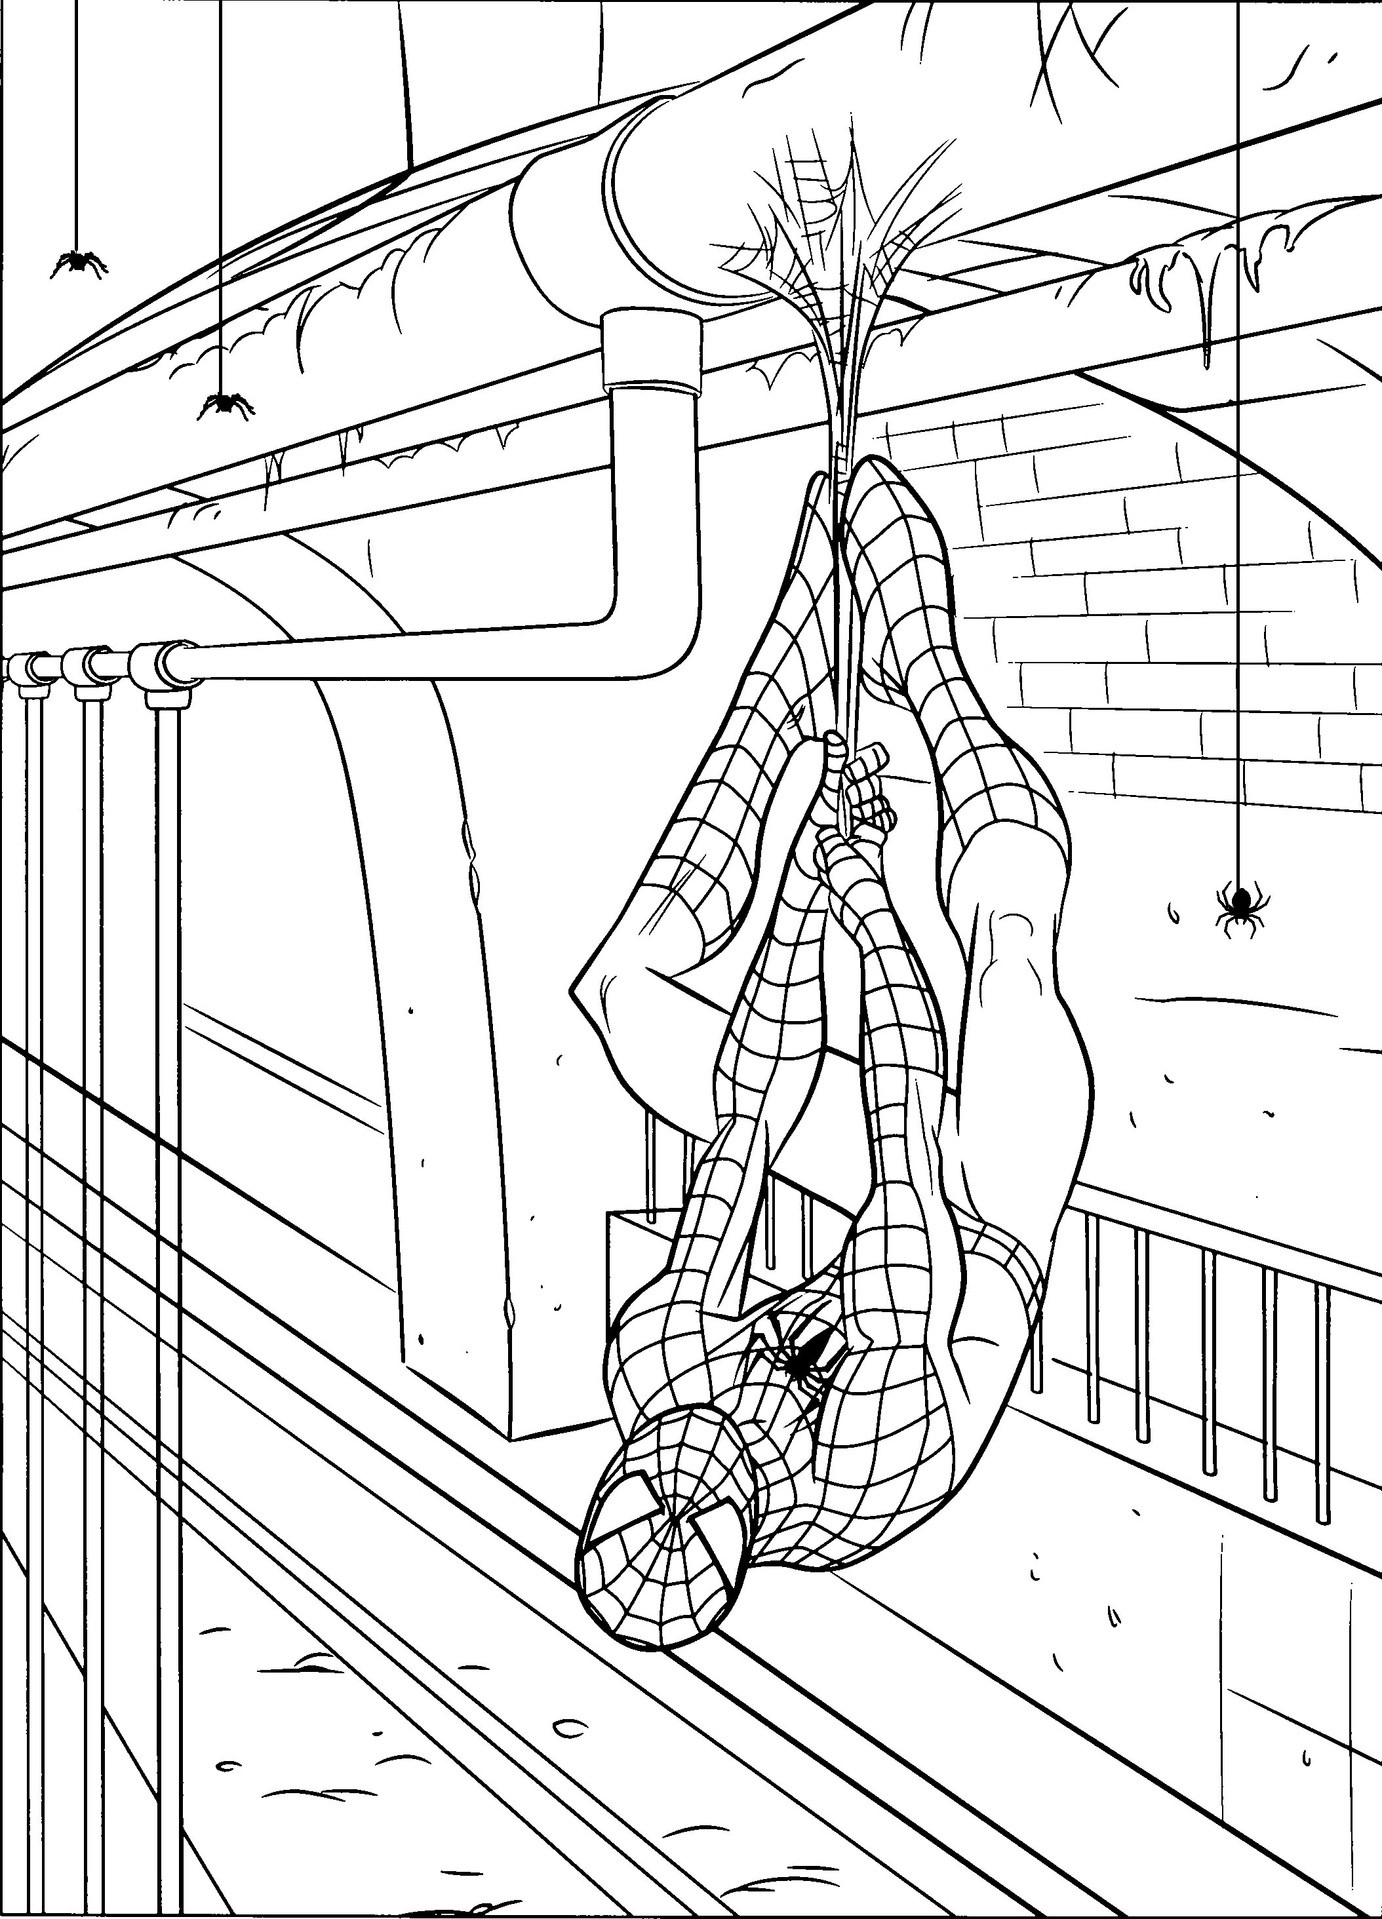 Free Printable Spiderman Coloring Pages Free Printable Spiderman Coloring Pages For Kids For Spiderman Free